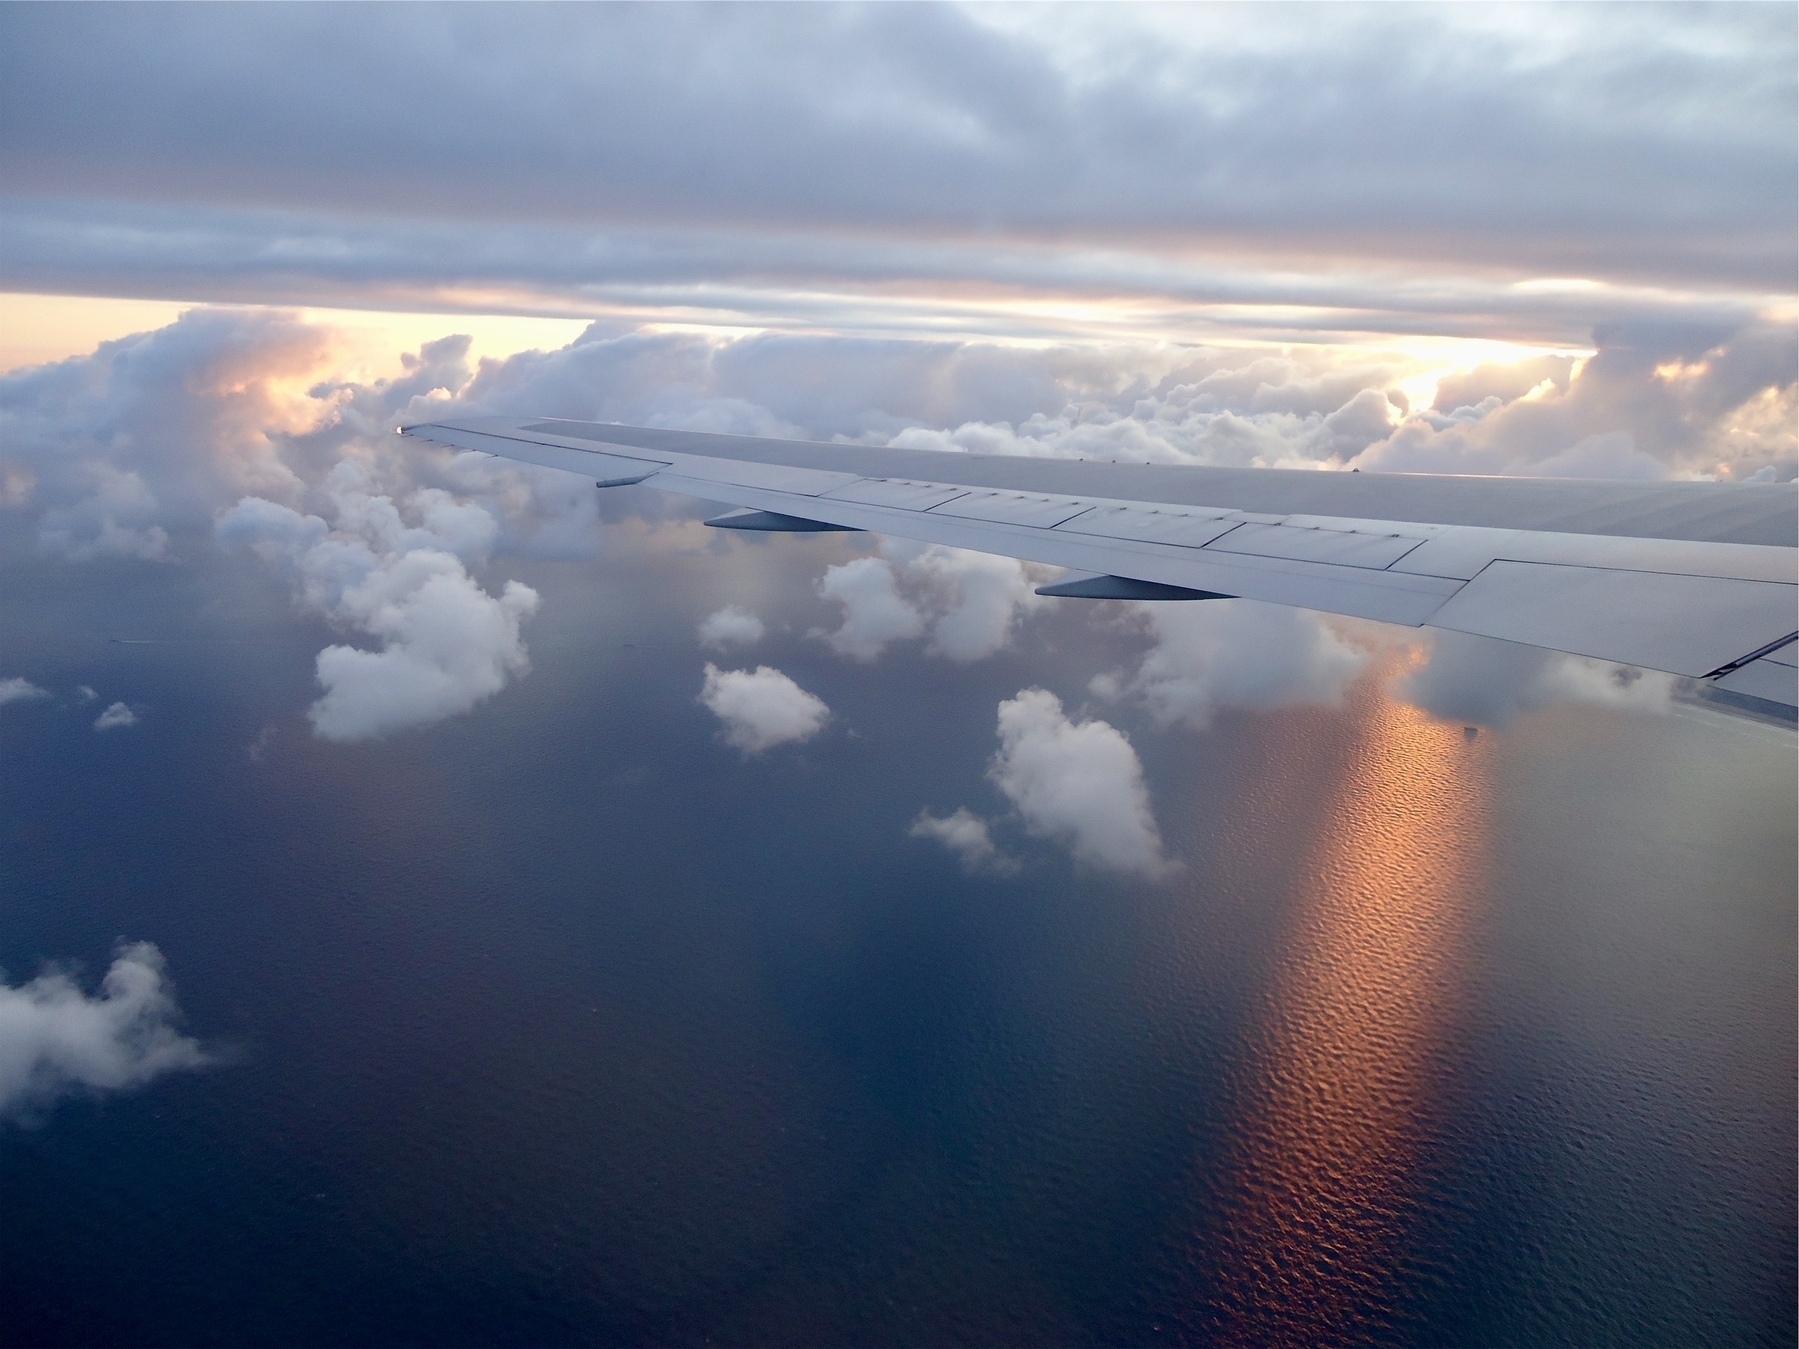 iew of the sky and ocean, from an airplane; the ocean is a deep blue/purple below, with a hint of sunlight appearing on the water from behind the clouds, while the white wing of the plan is across the middle of the image.